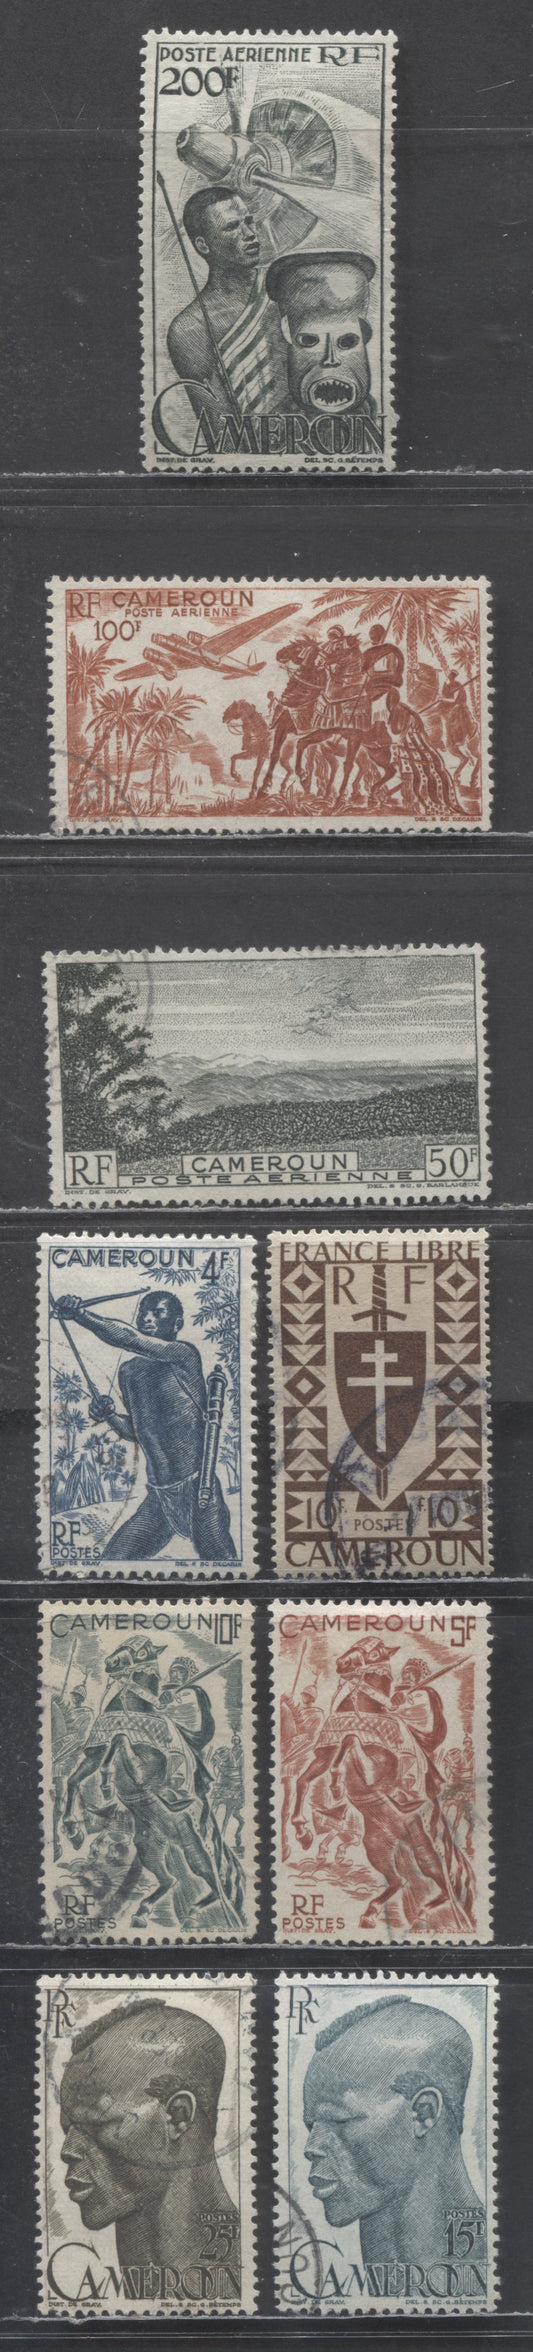 Lot 94 Cameroun SC#294/C28 1941-1947 Pictorial Definitives - Airmails, 9 Very Fine Used Singles, Click on Listing to See ALL Pictures, 2017 Scott Cat. $9.55